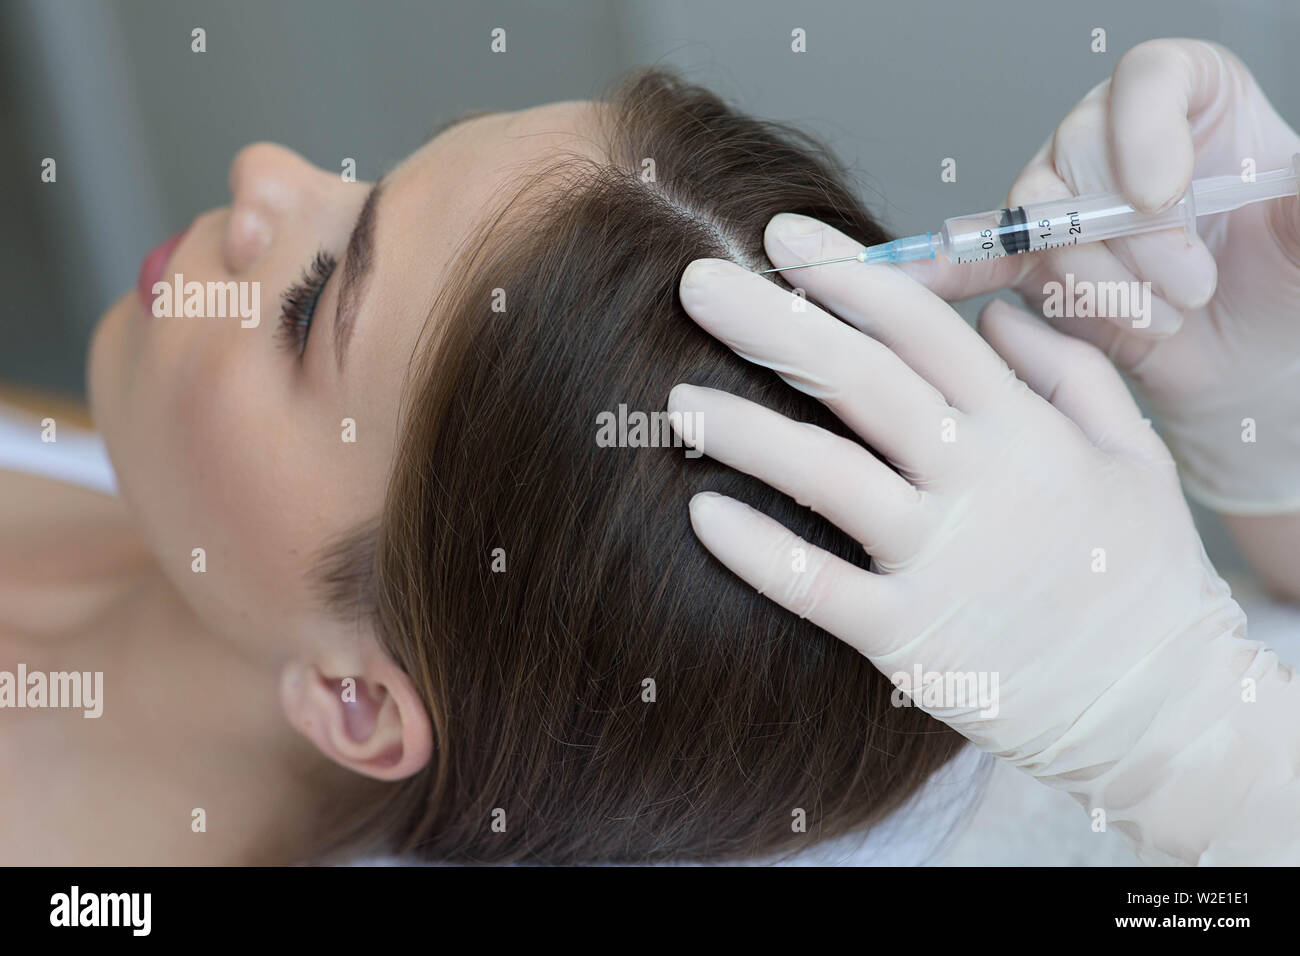 treatment of hair loss, injection for hair growth. Injected in woman's head, hair mesotherapy Stock Photo